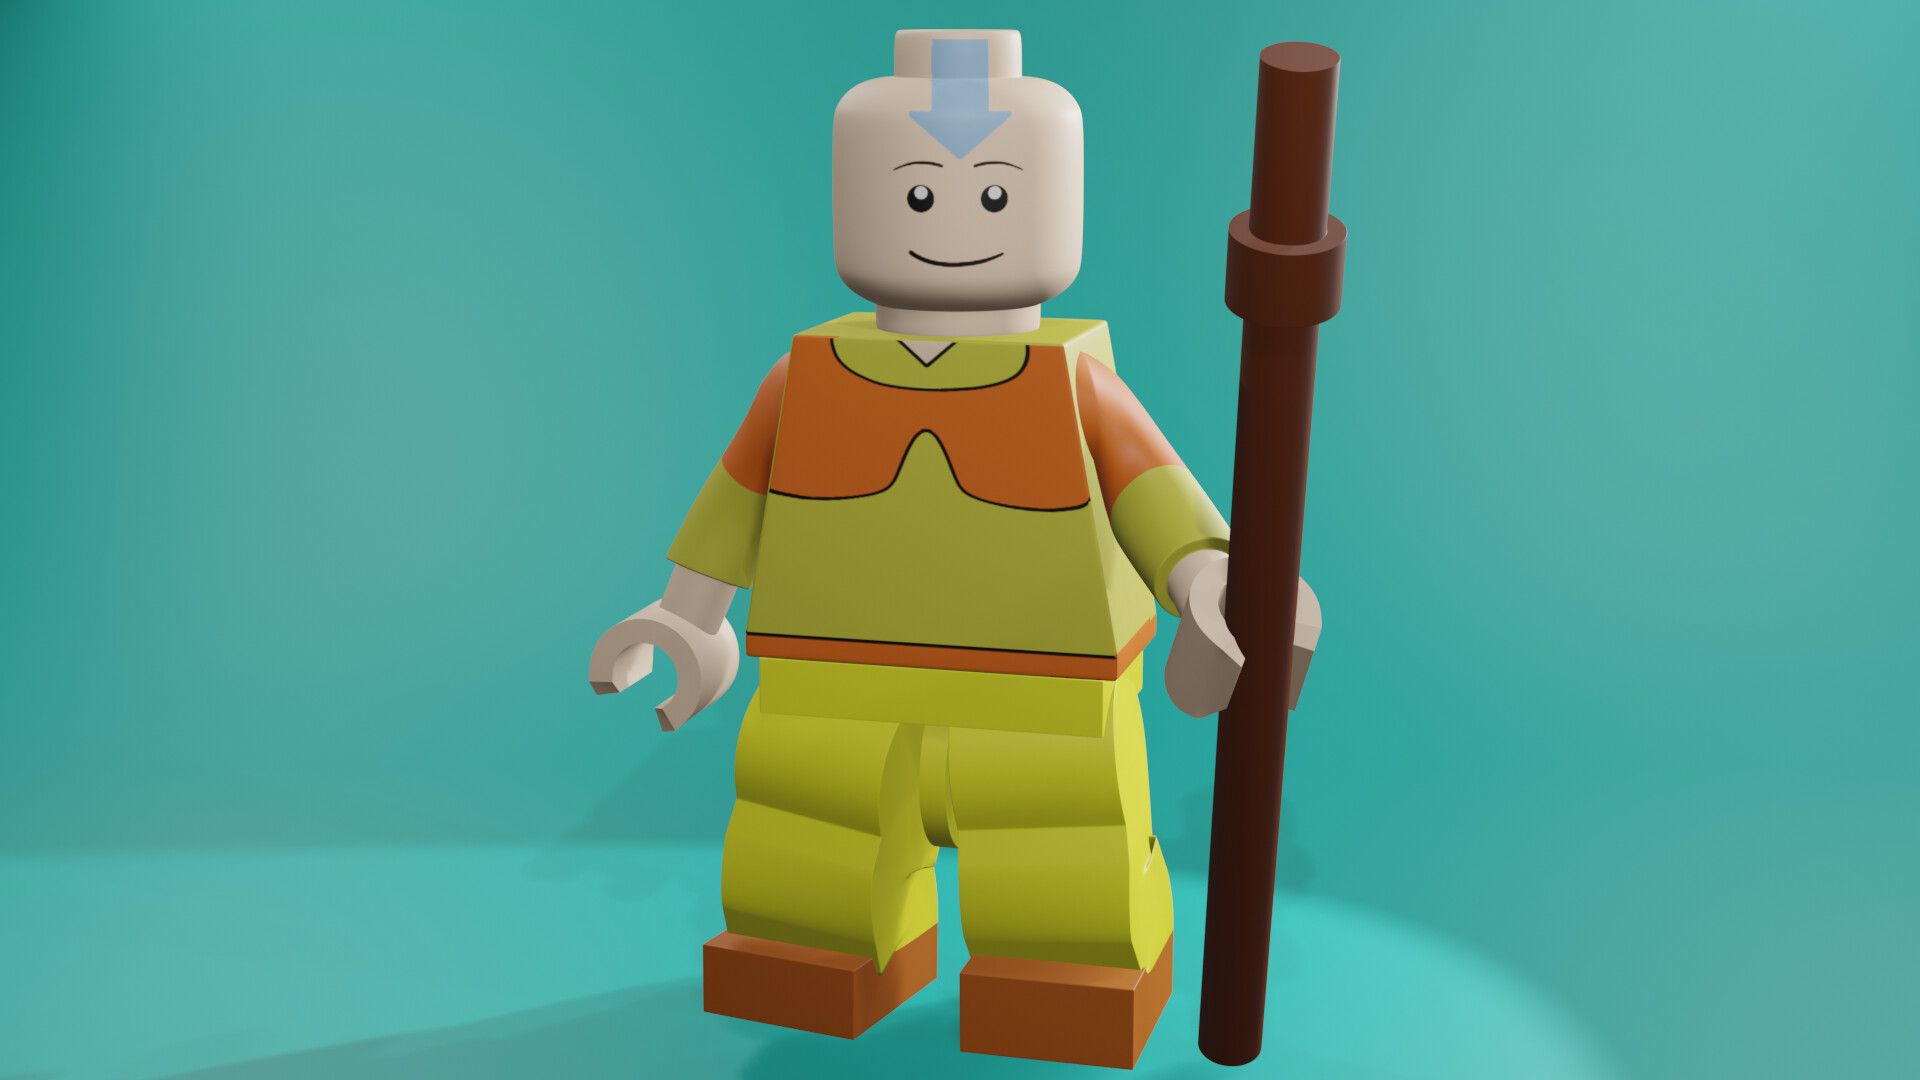 ArtStation 3D model lego Aang from the Avatar the last air bender